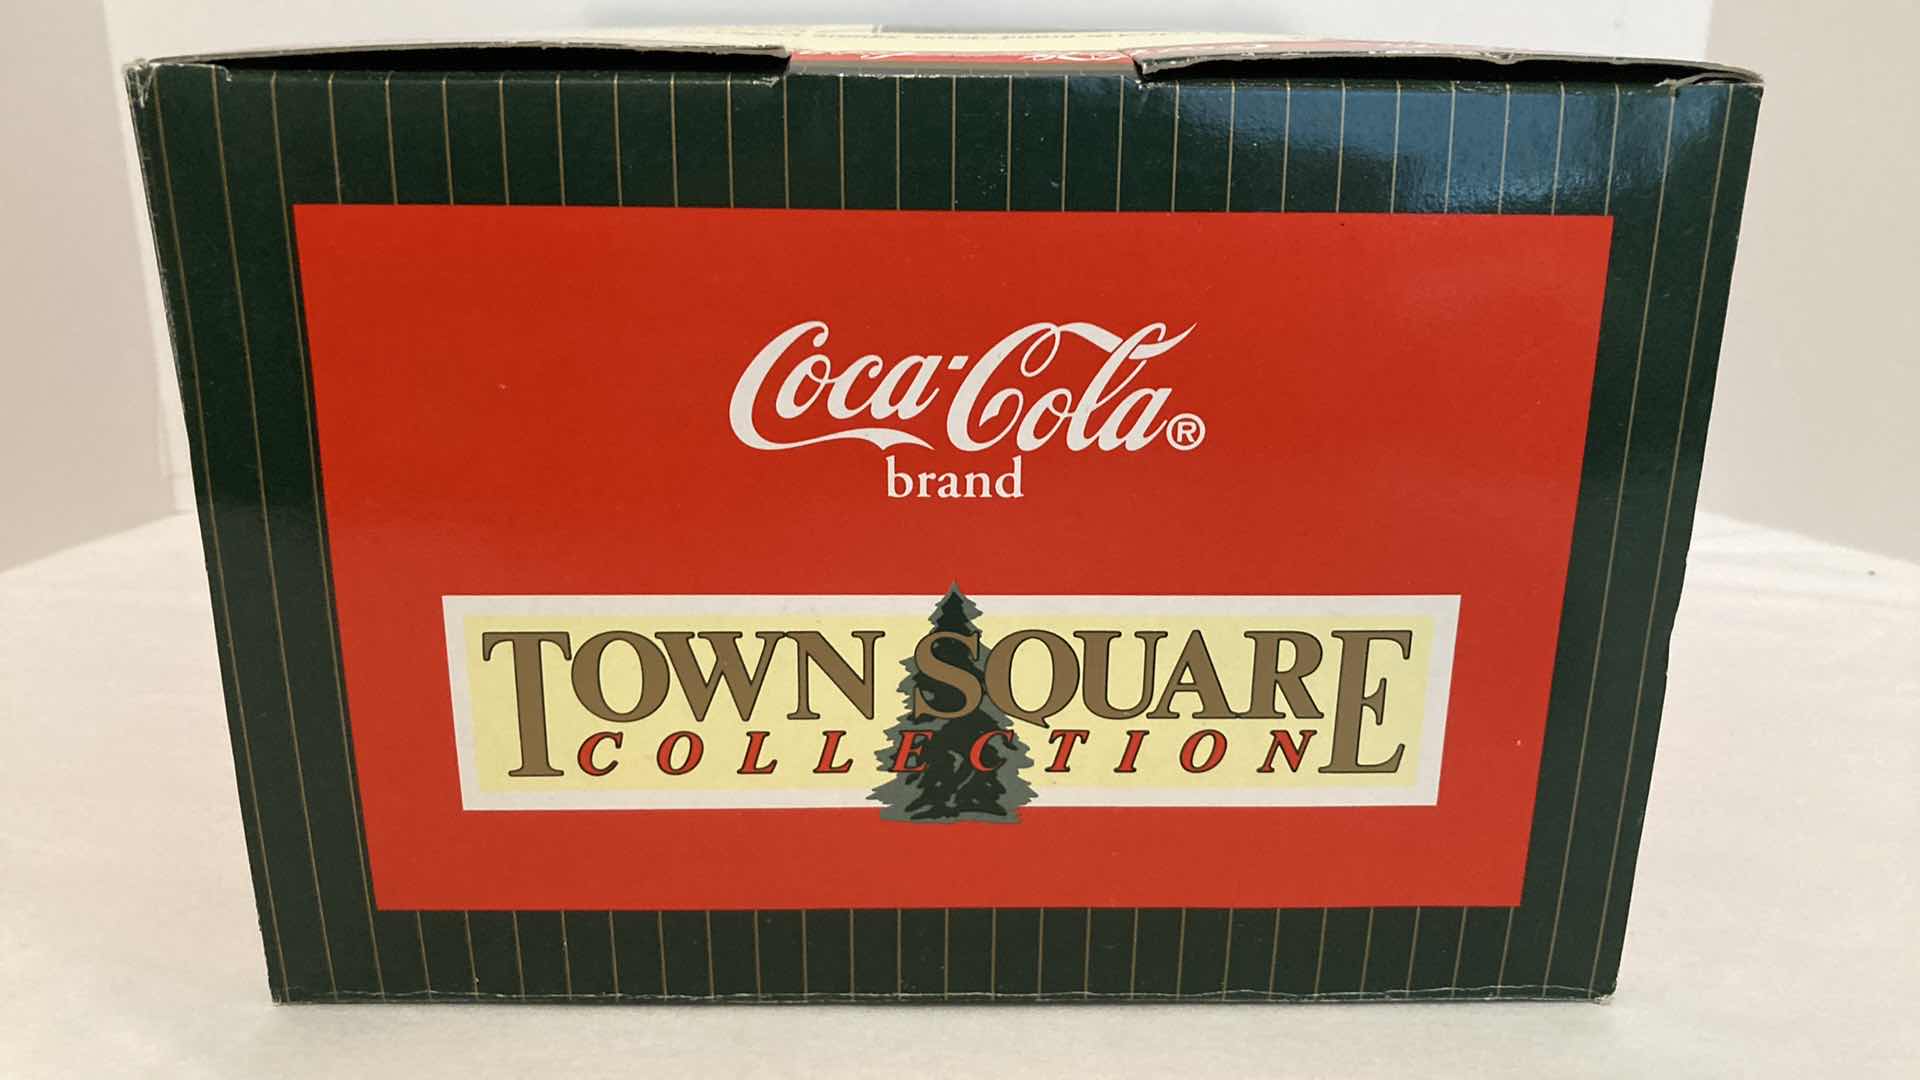 Photo 5 of COCA-COLA SOUTH STATION TOWN SQUARE COLLECTION PORCELAIN DECORATION